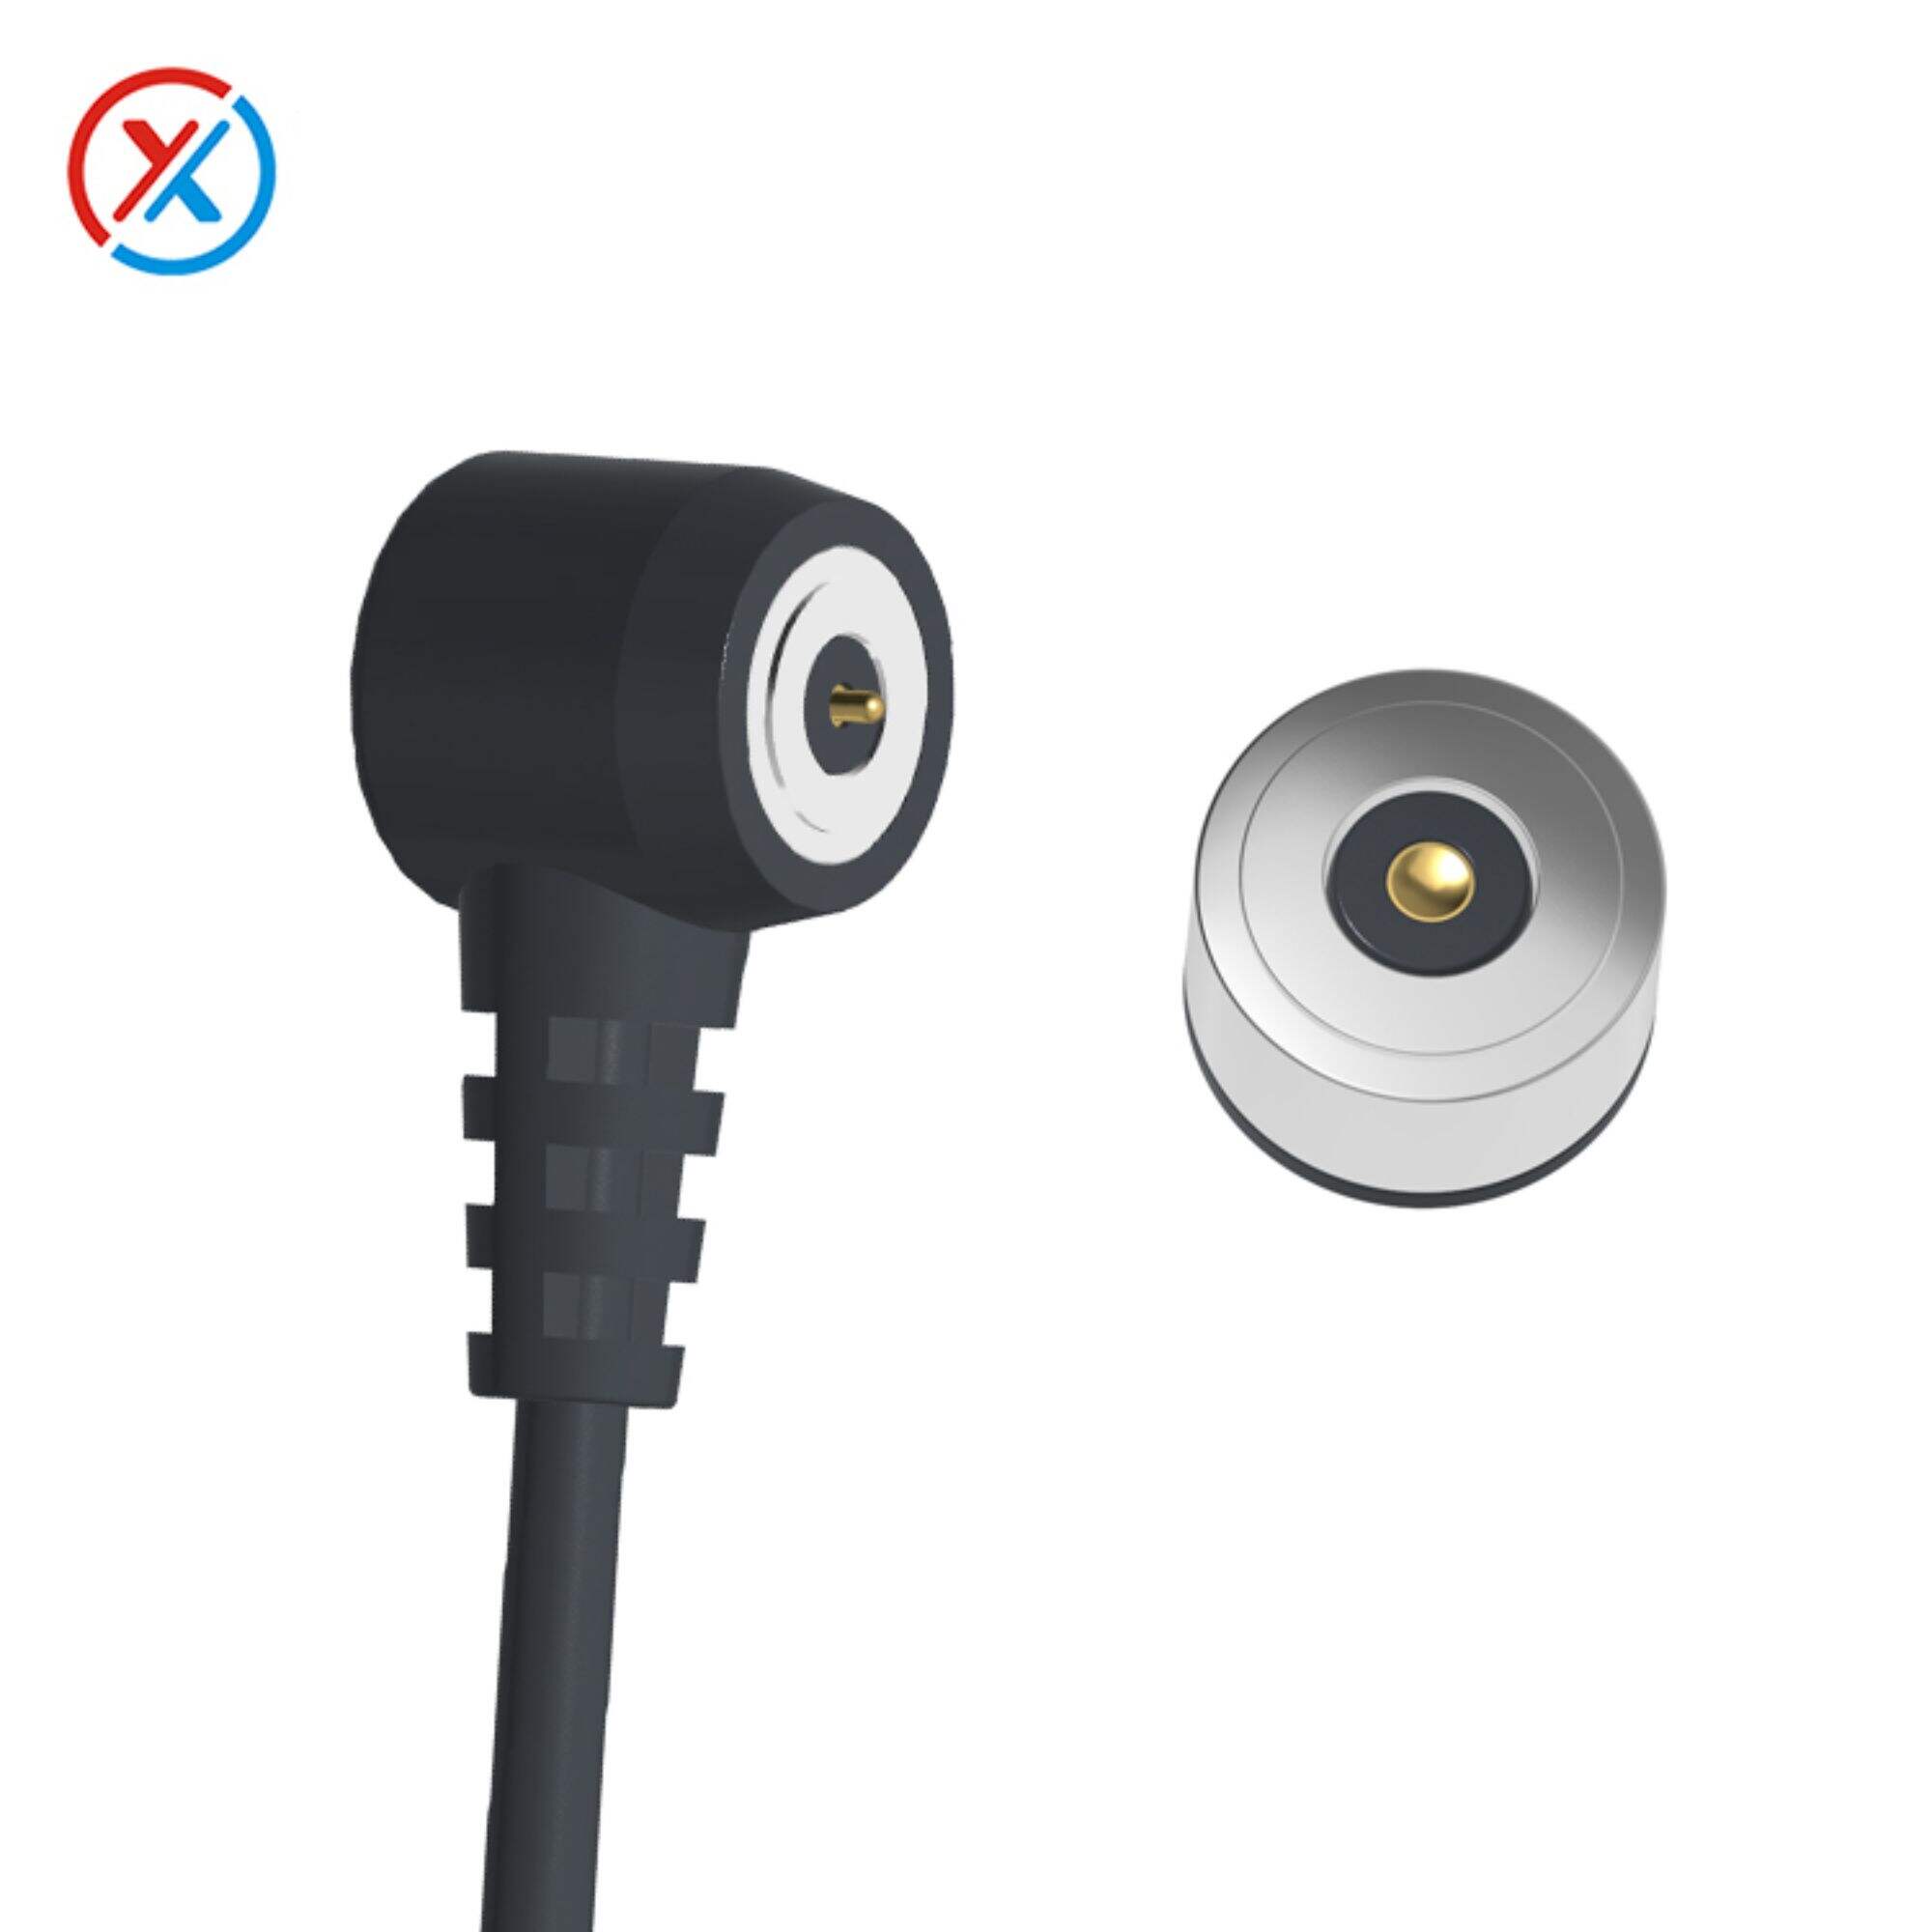 Cost-effective circular magnetic data cable,Circular magnetic charging cable for electronic cigarettes and toys,10mm male and female magnetic line